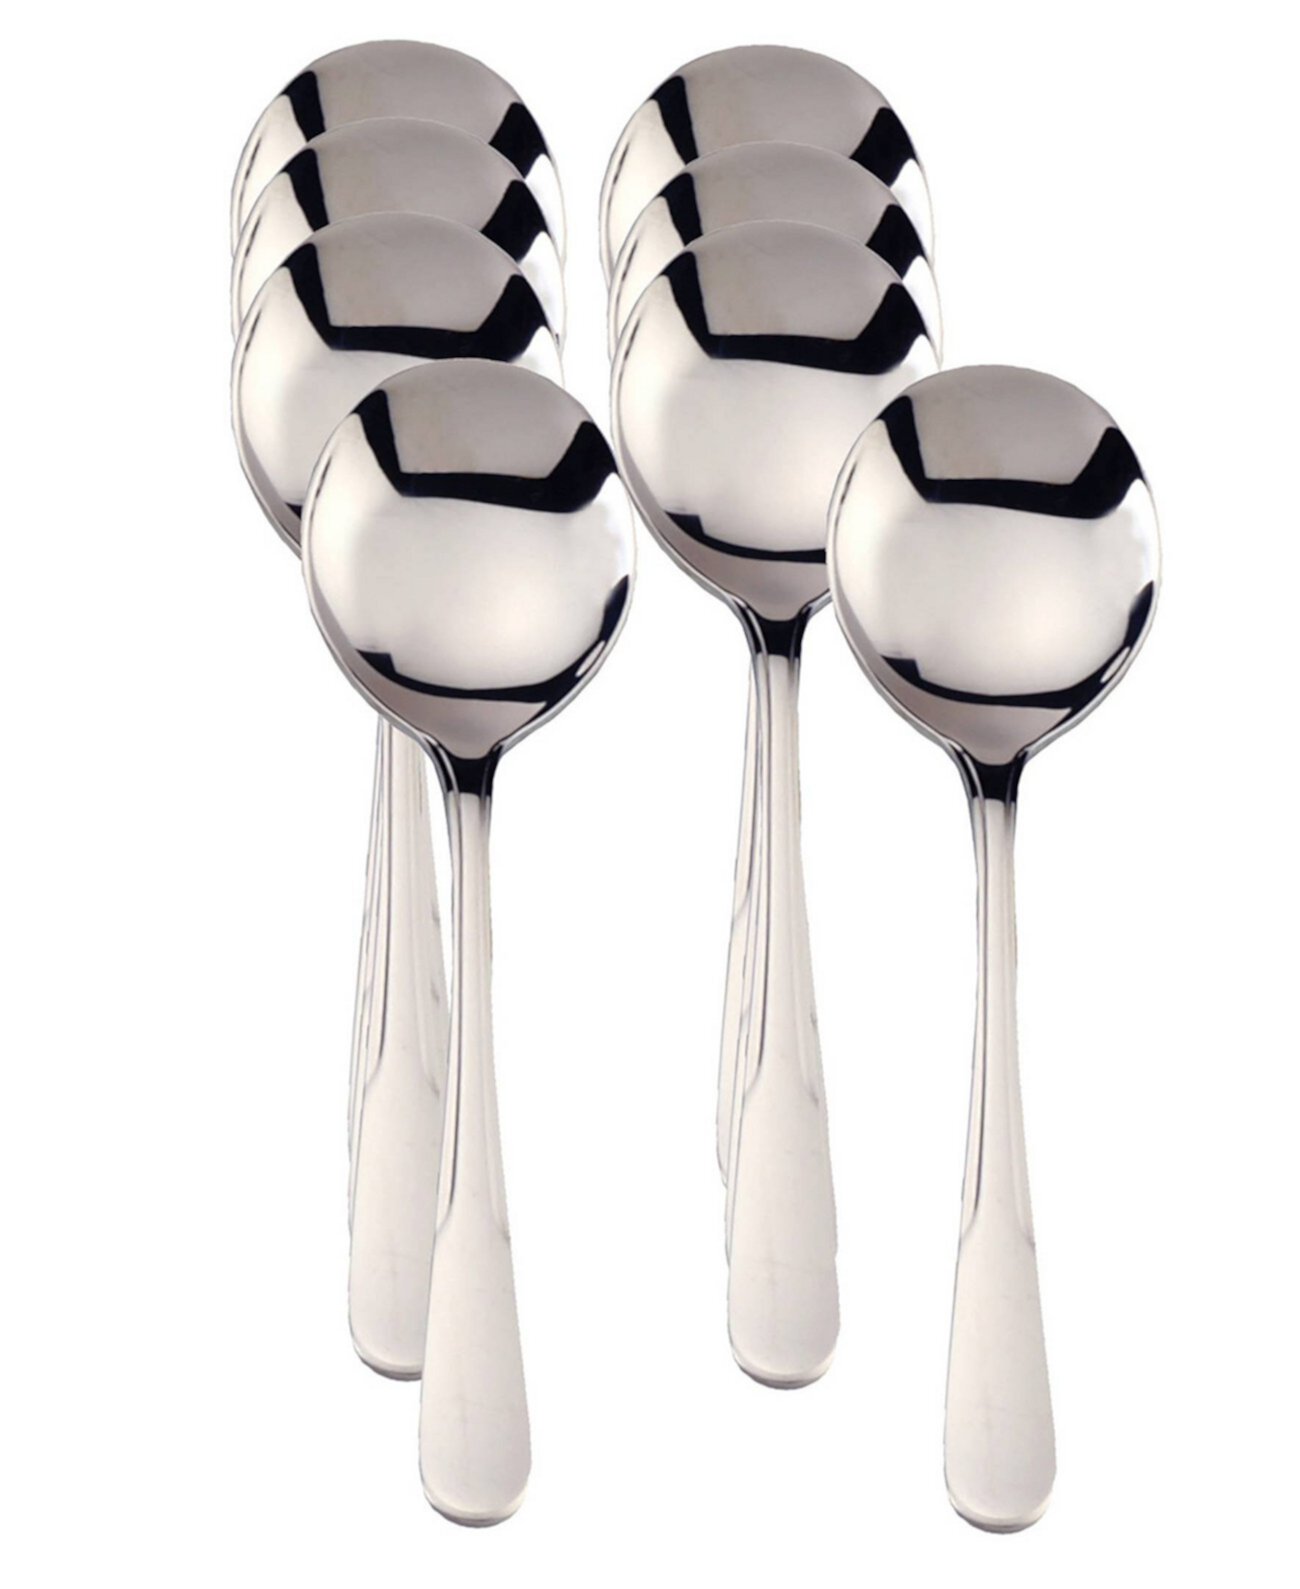 Endurance 18/8 Stainless Steel 8 Piece 6.7" Boxed Set of Soup Spoons RSVP International